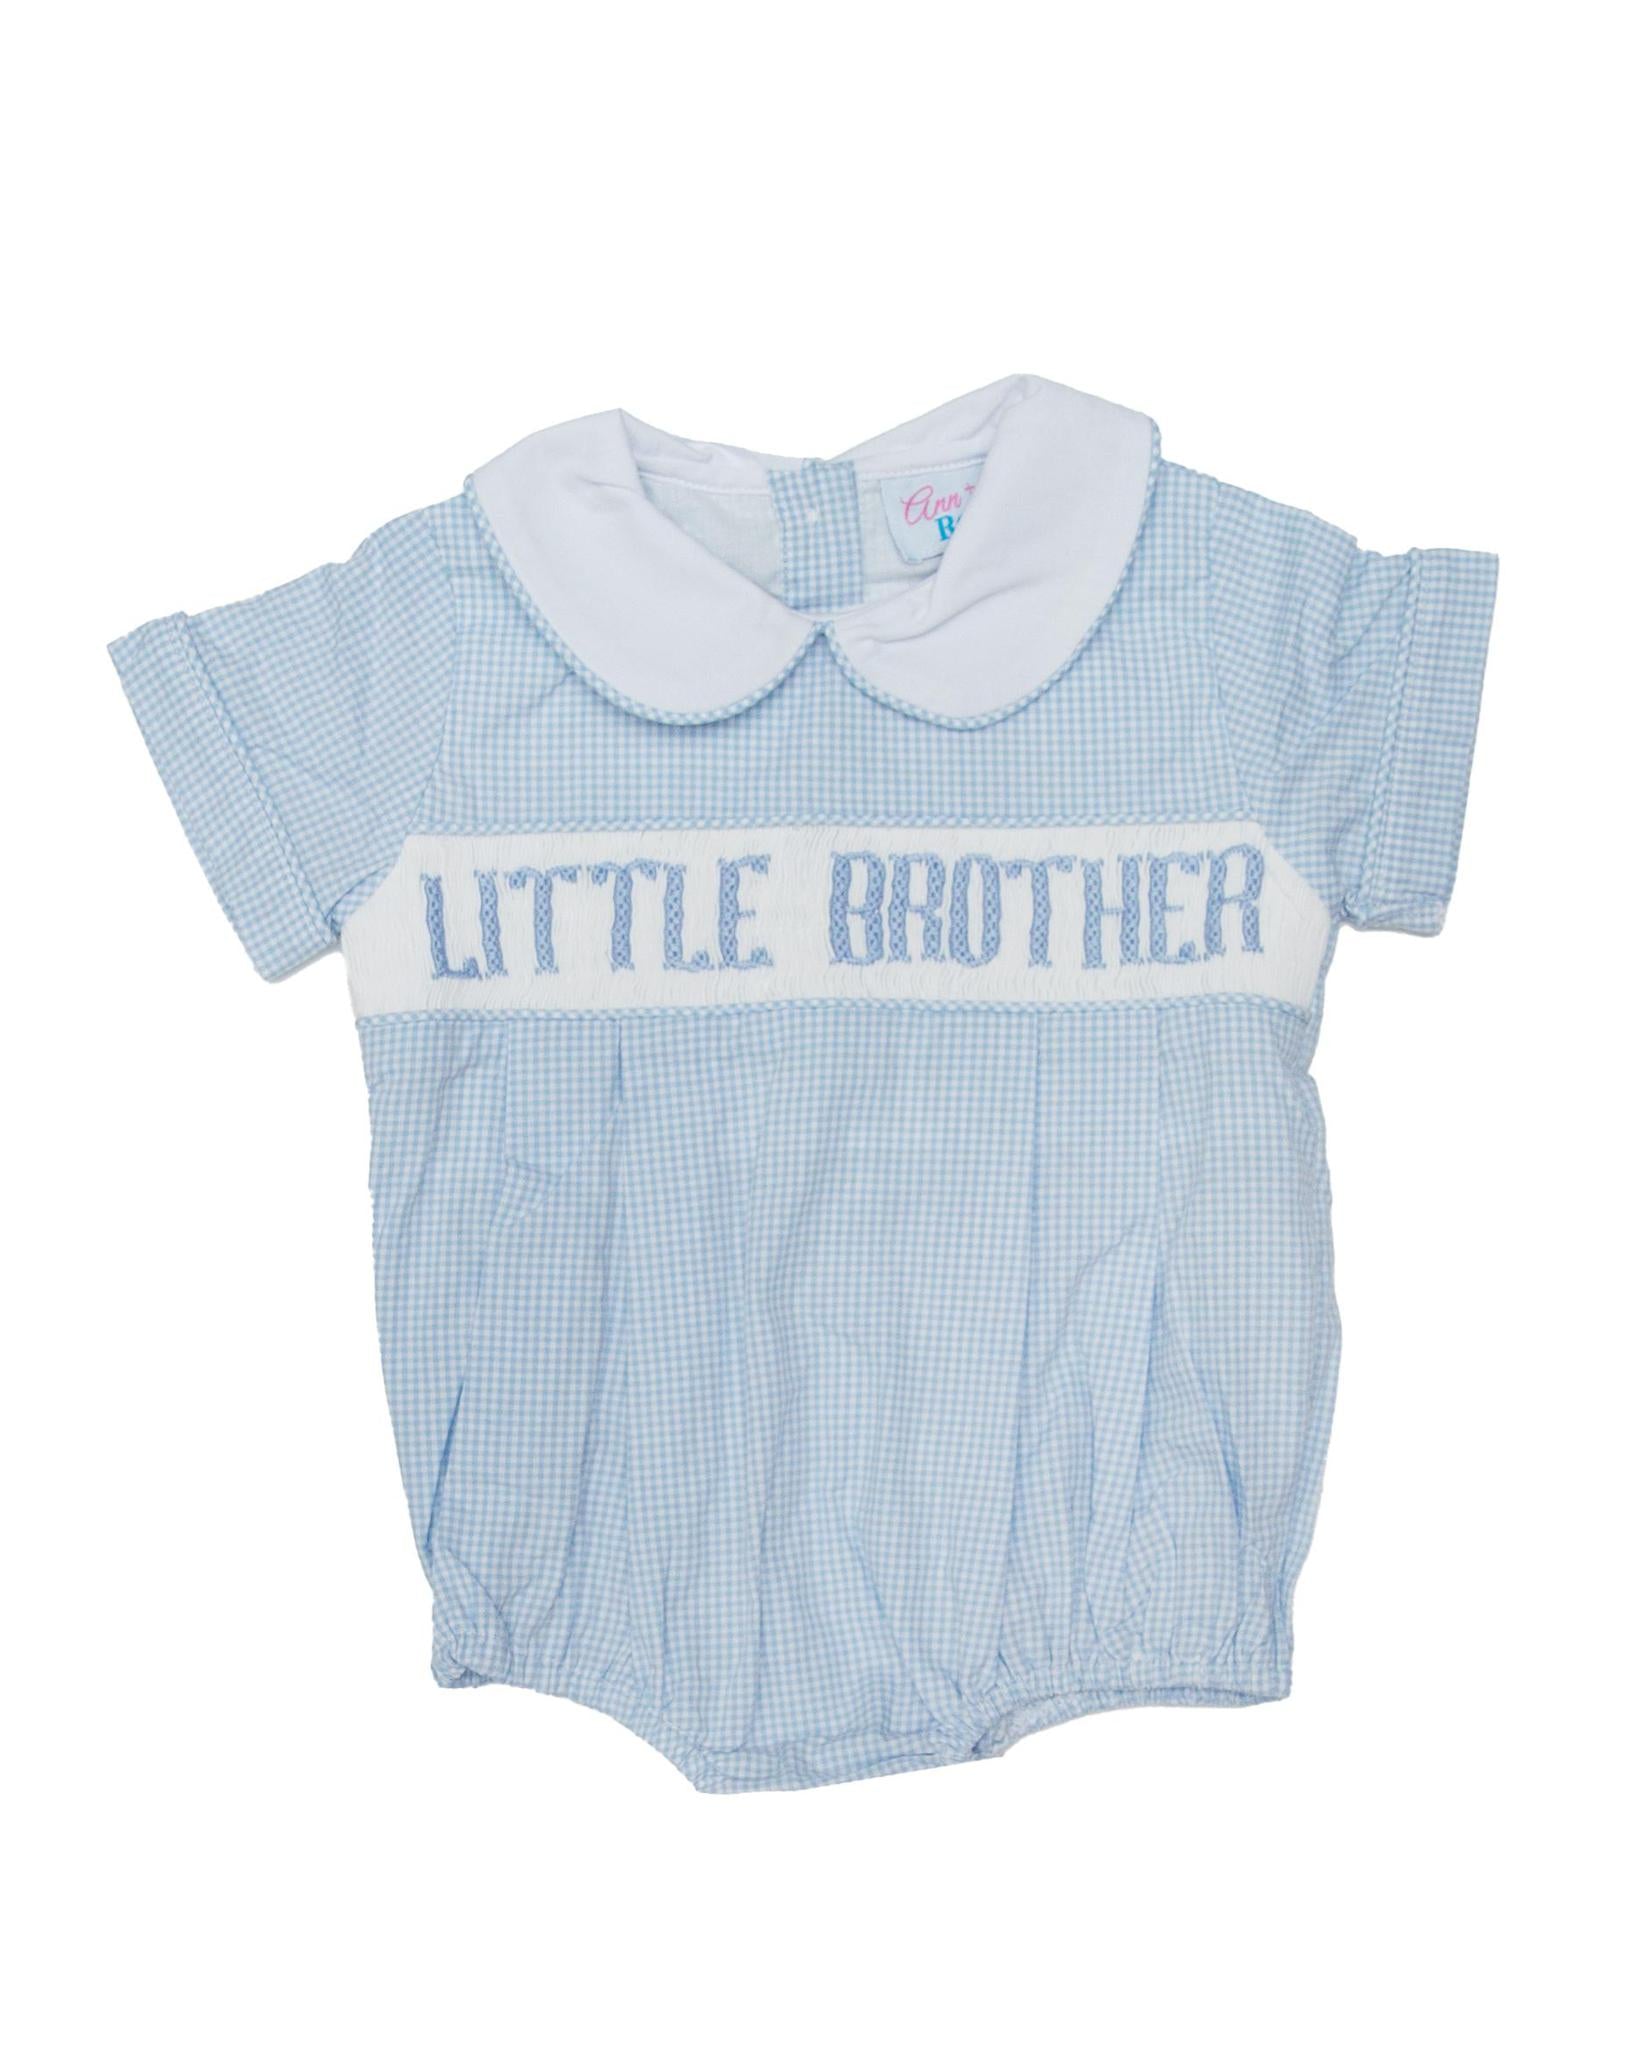 Little Brother - Blue Gingham Henry Bubble